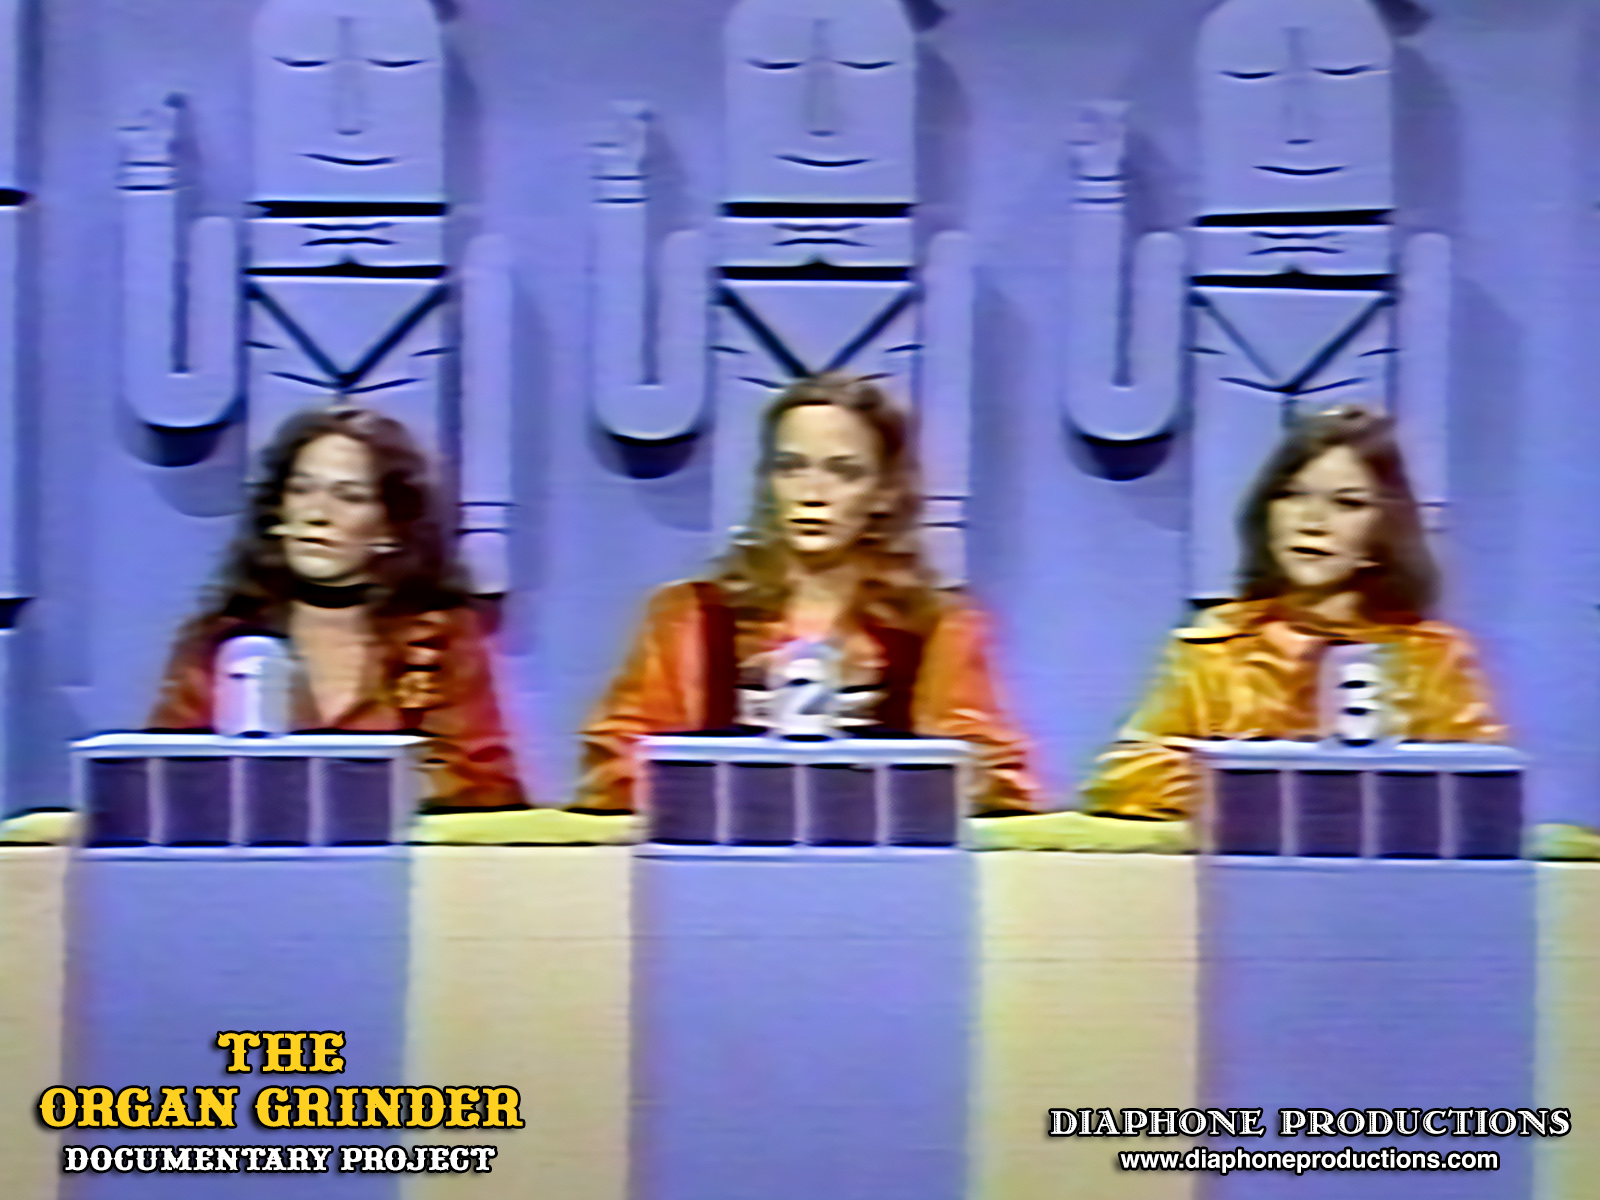 Frame grab from a 1970's episode of the TV game show "To Tell the Truth" featuring three women stating that they are the world's only female Organ Grinder.